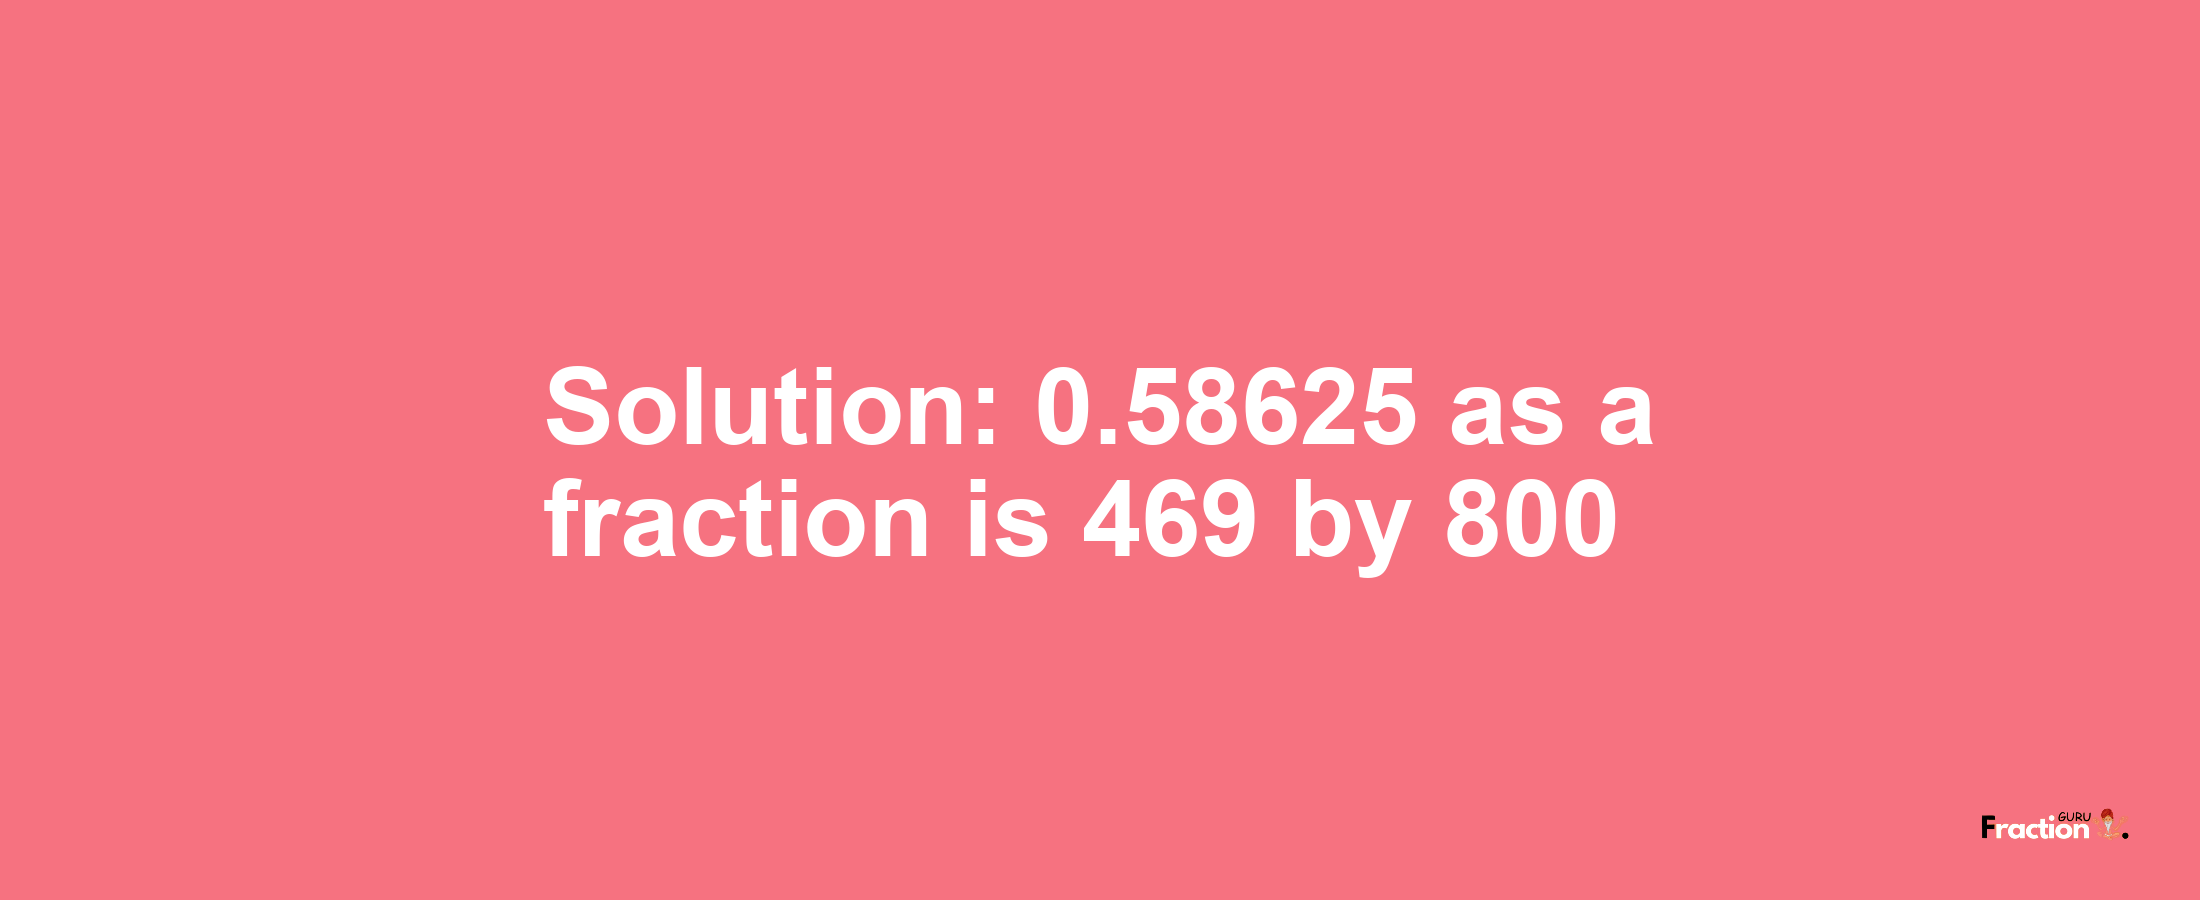 Solution:0.58625 as a fraction is 469/800